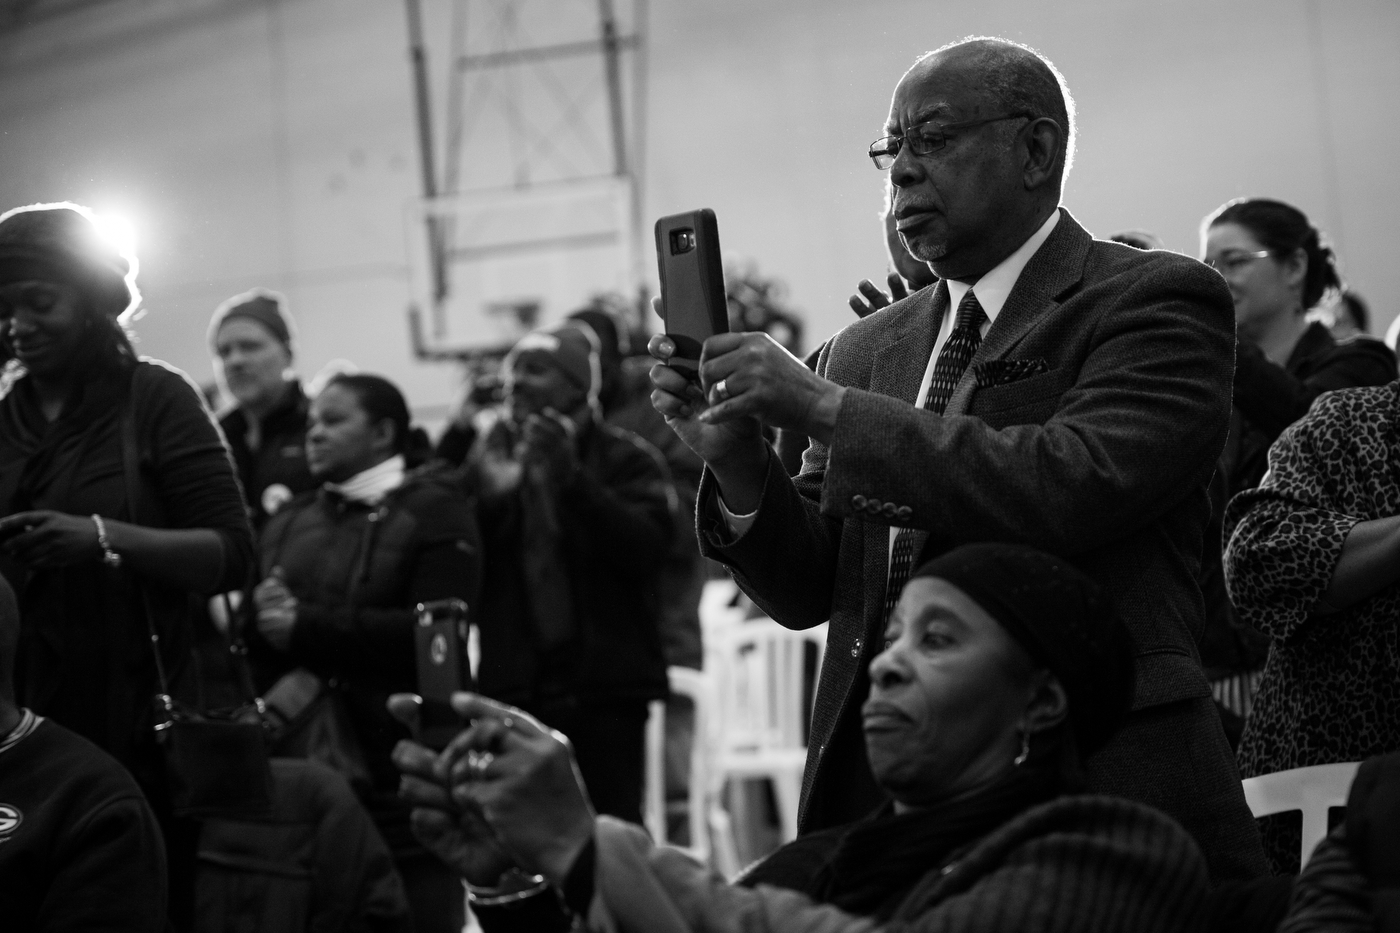  People photograph as Democratic presidential candidate Bernie Sanders takes the stage at an African-American Community Conversation town hall event in Milwaukee, Wisconsin on April 2. Sanders struggled behind opponent Hillary Clinton to garner the s